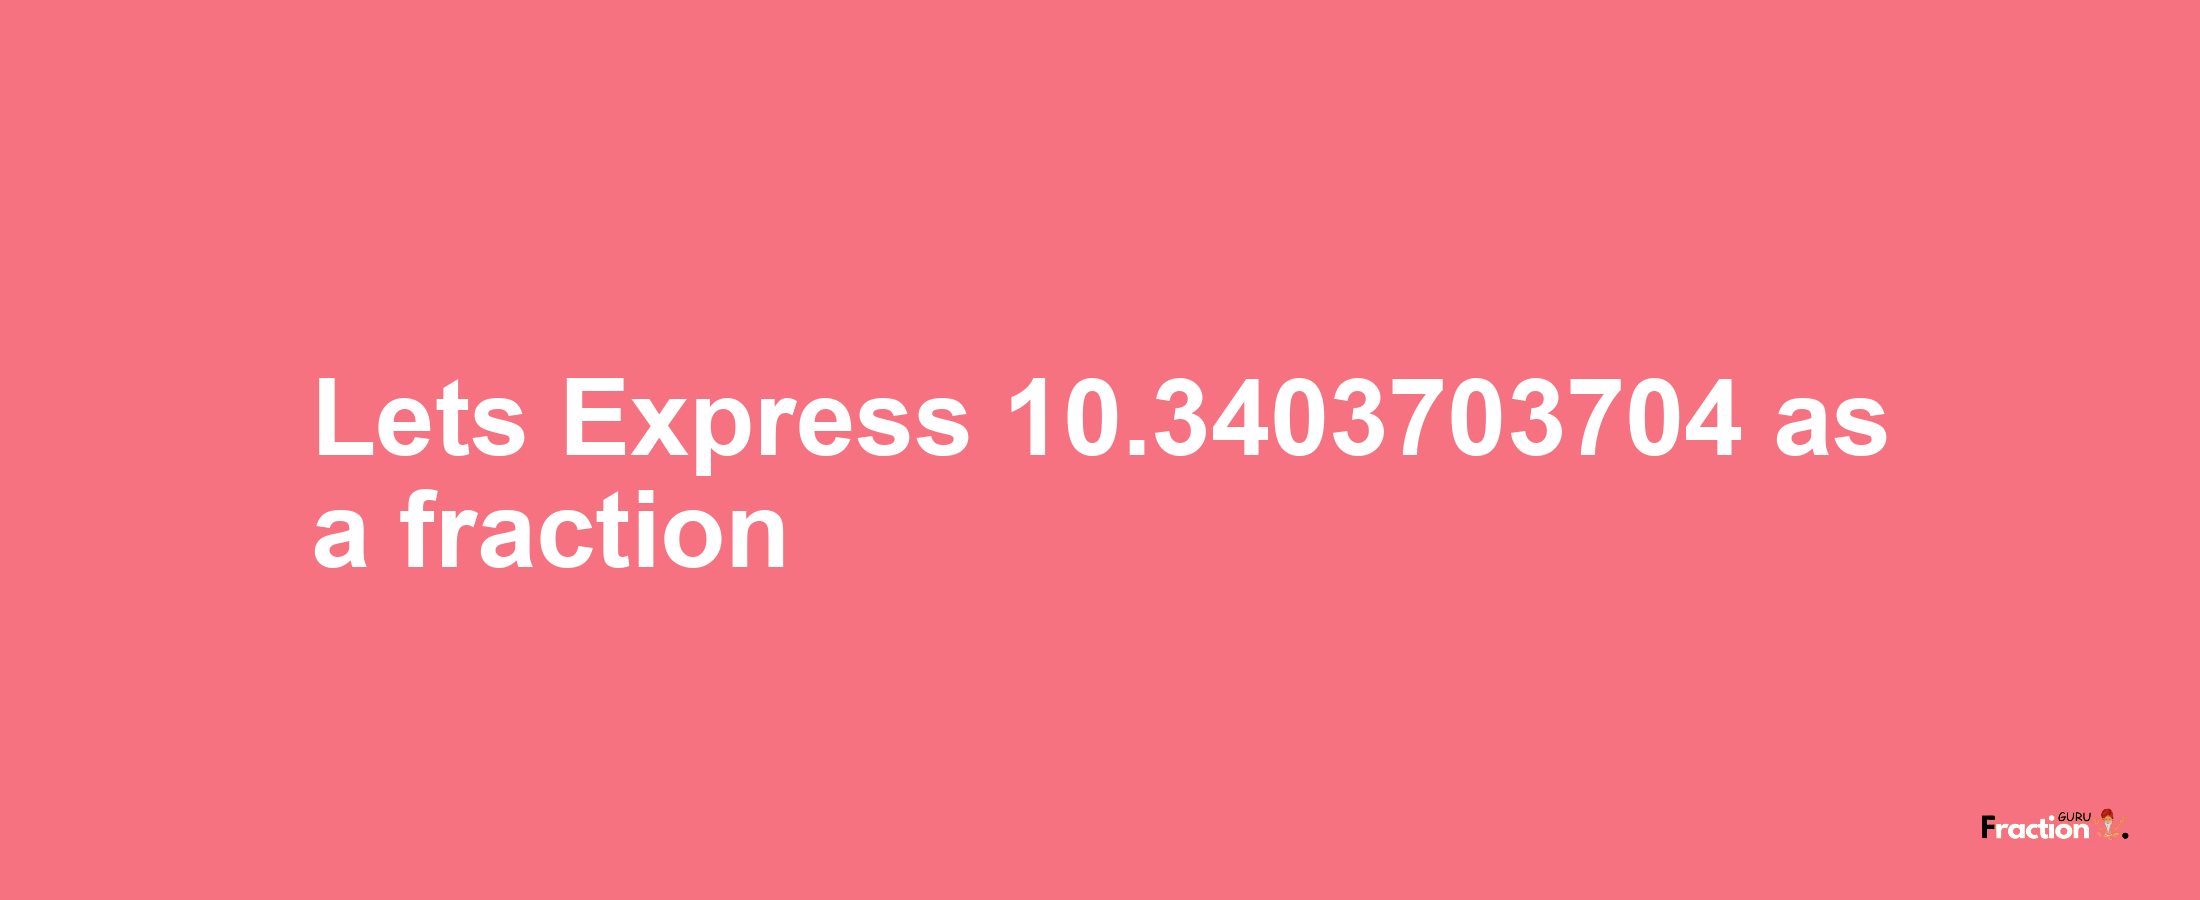 Lets Express 10.3403703704 as afraction